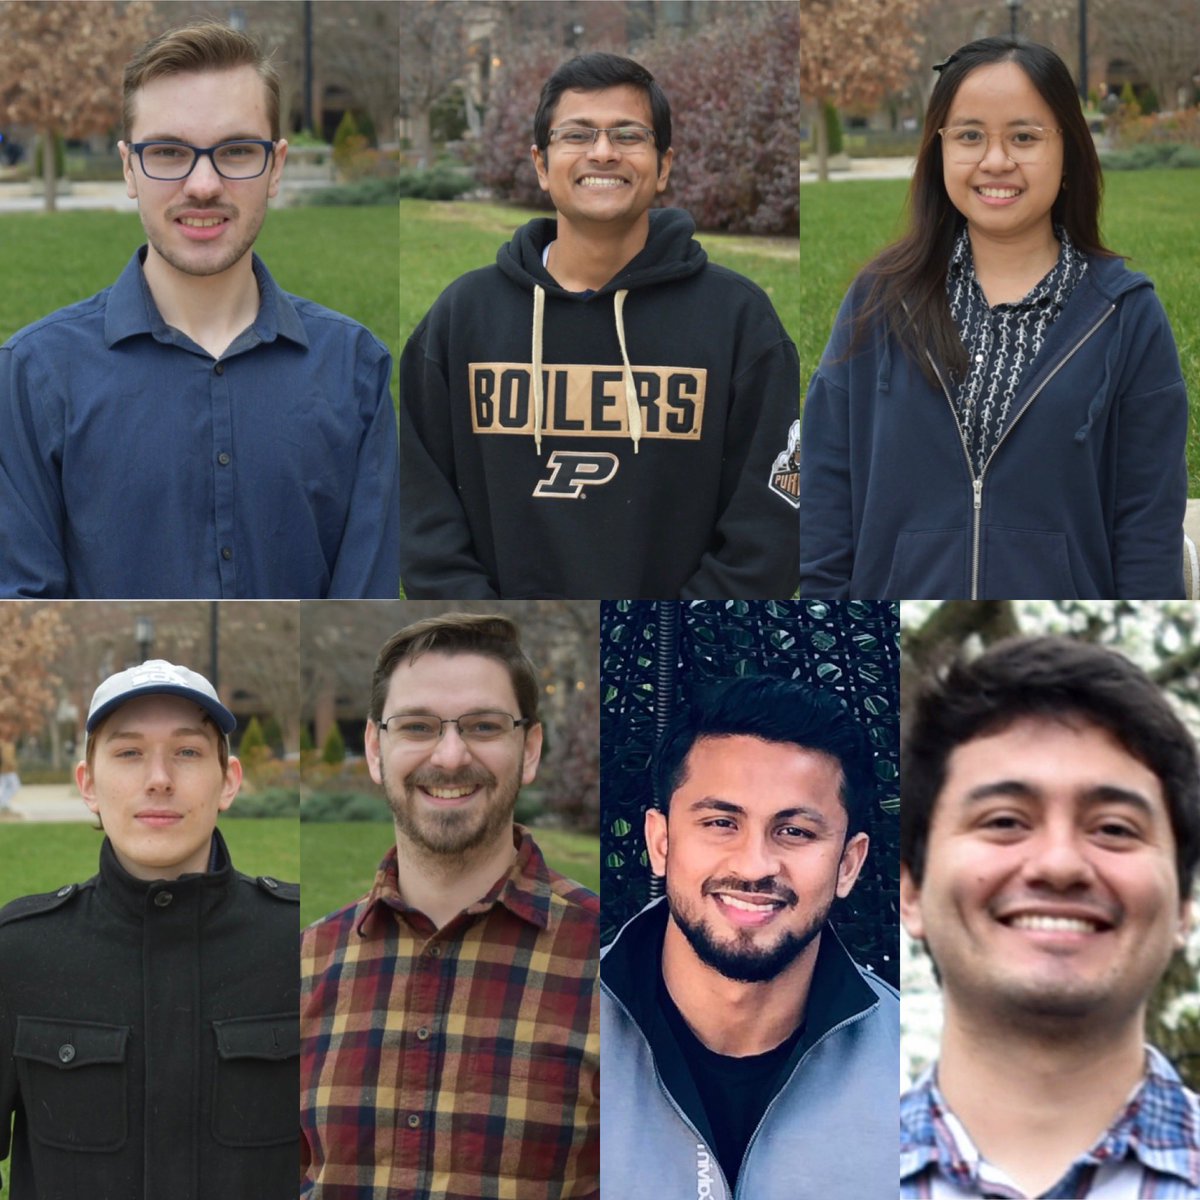 Welcoming Brady, Rishi, Den, Myles, Dane, Ashutosh, and Cristian to the Dick lab! Can’t wait to see these seven thrive as scientists!